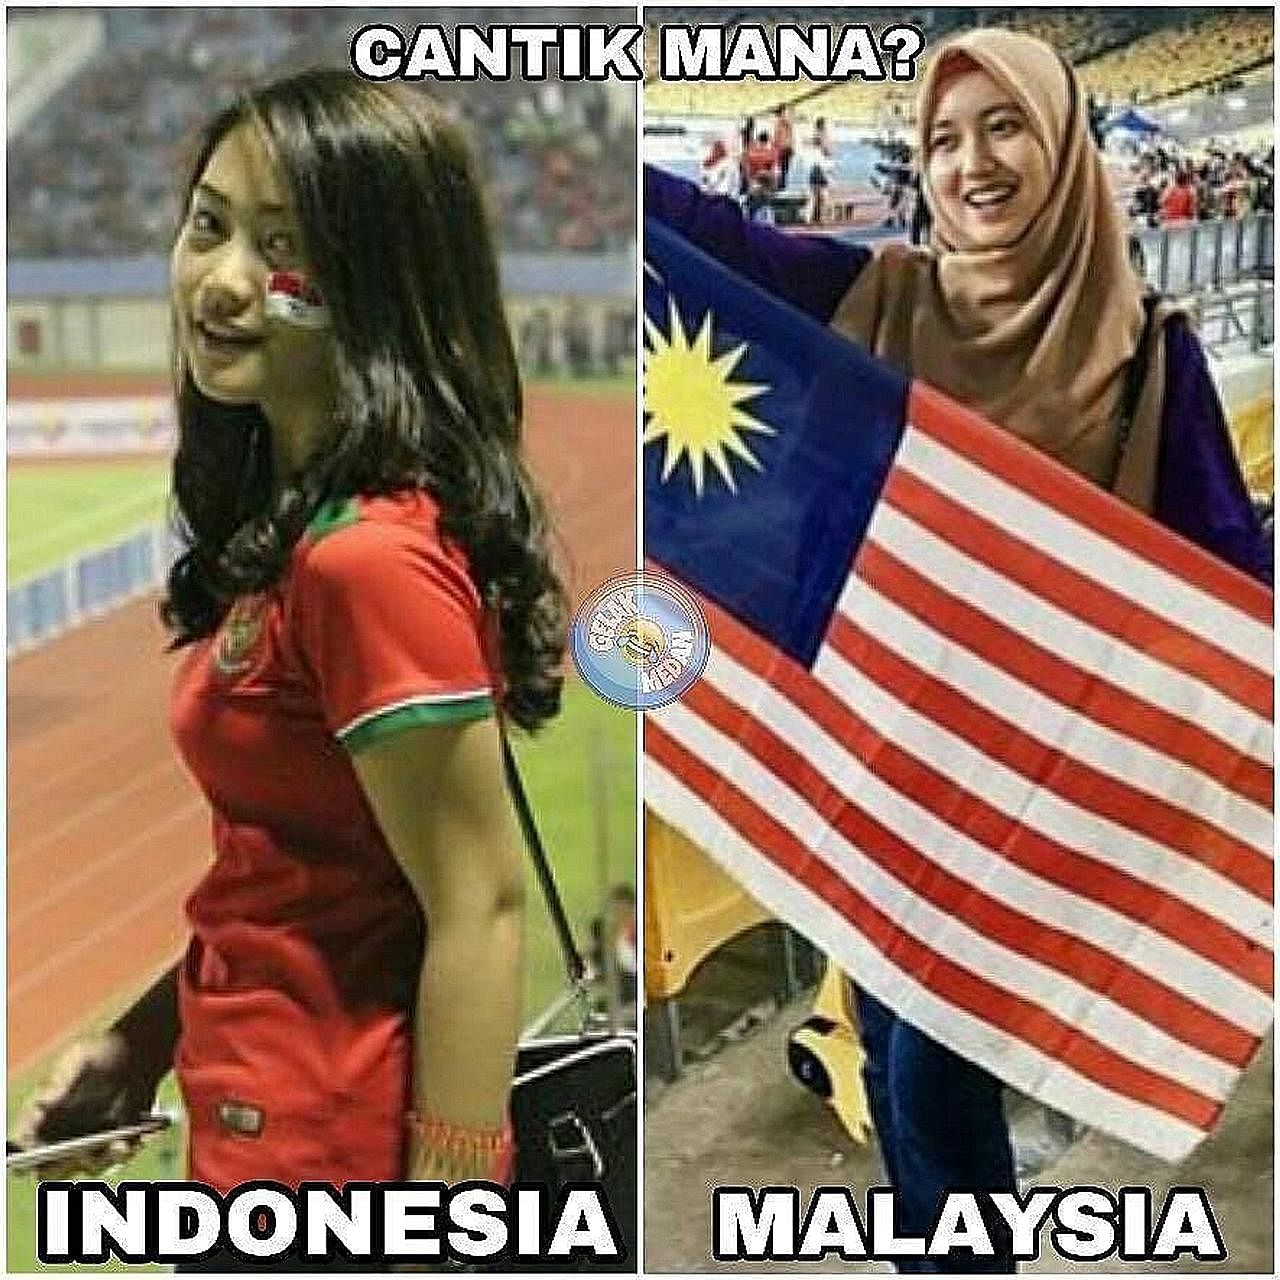 Who's the fairer of them? Ahead of the football semi-final between Indonesia and Malaysia, social media users extended the competition between the two countries to another between fans in the stands.